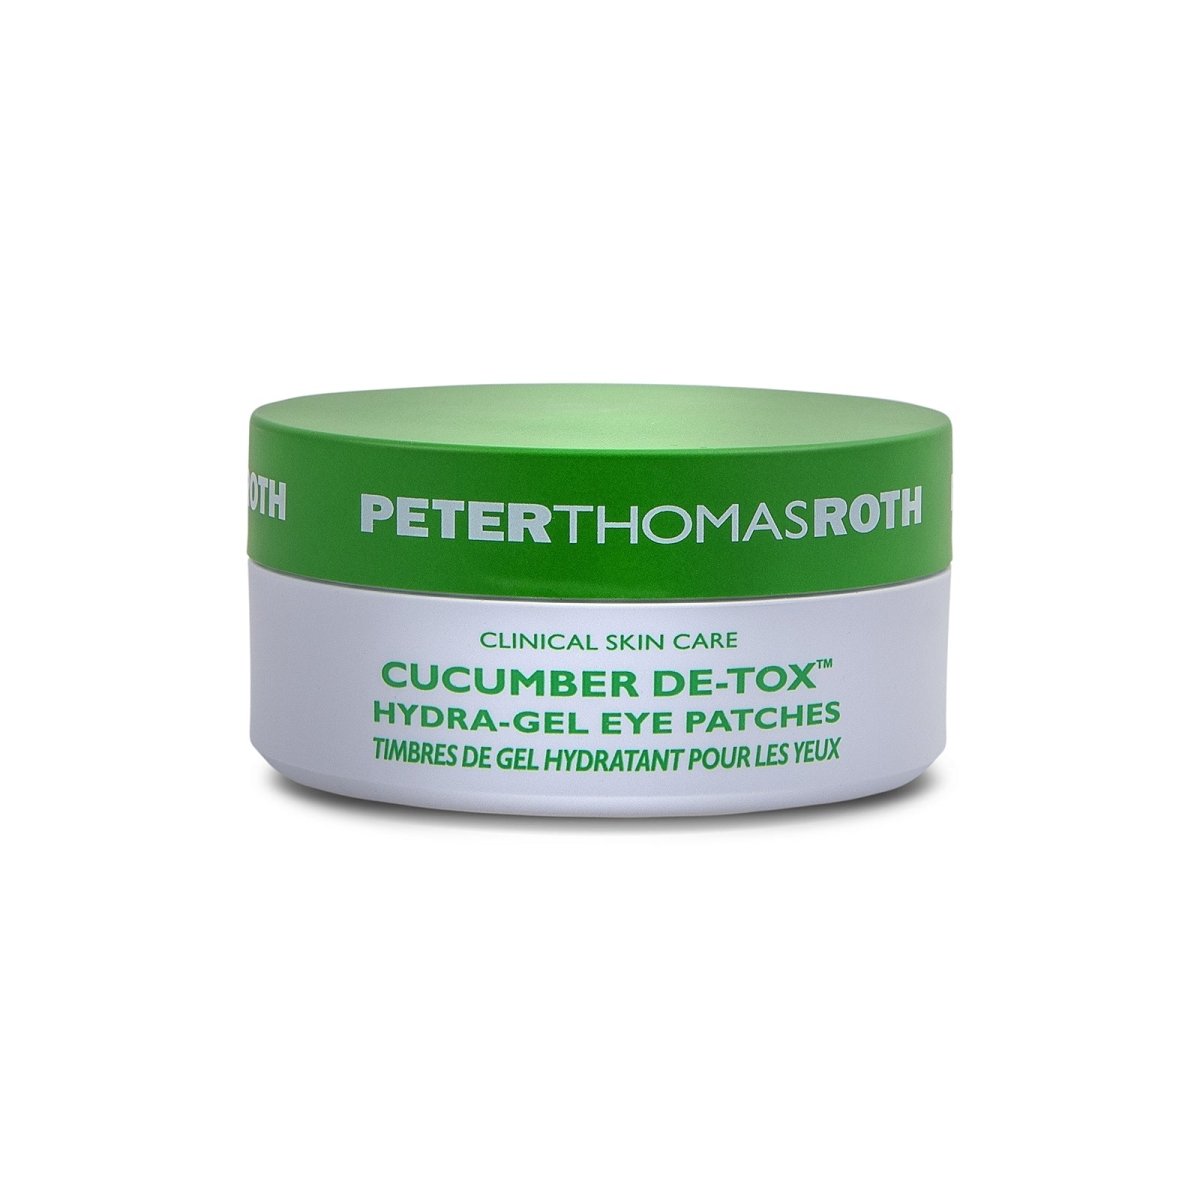 Peter Thomas Roth Cucumber De-Tox™ Hydra-Gel Eye Patches - SkincareEssentials